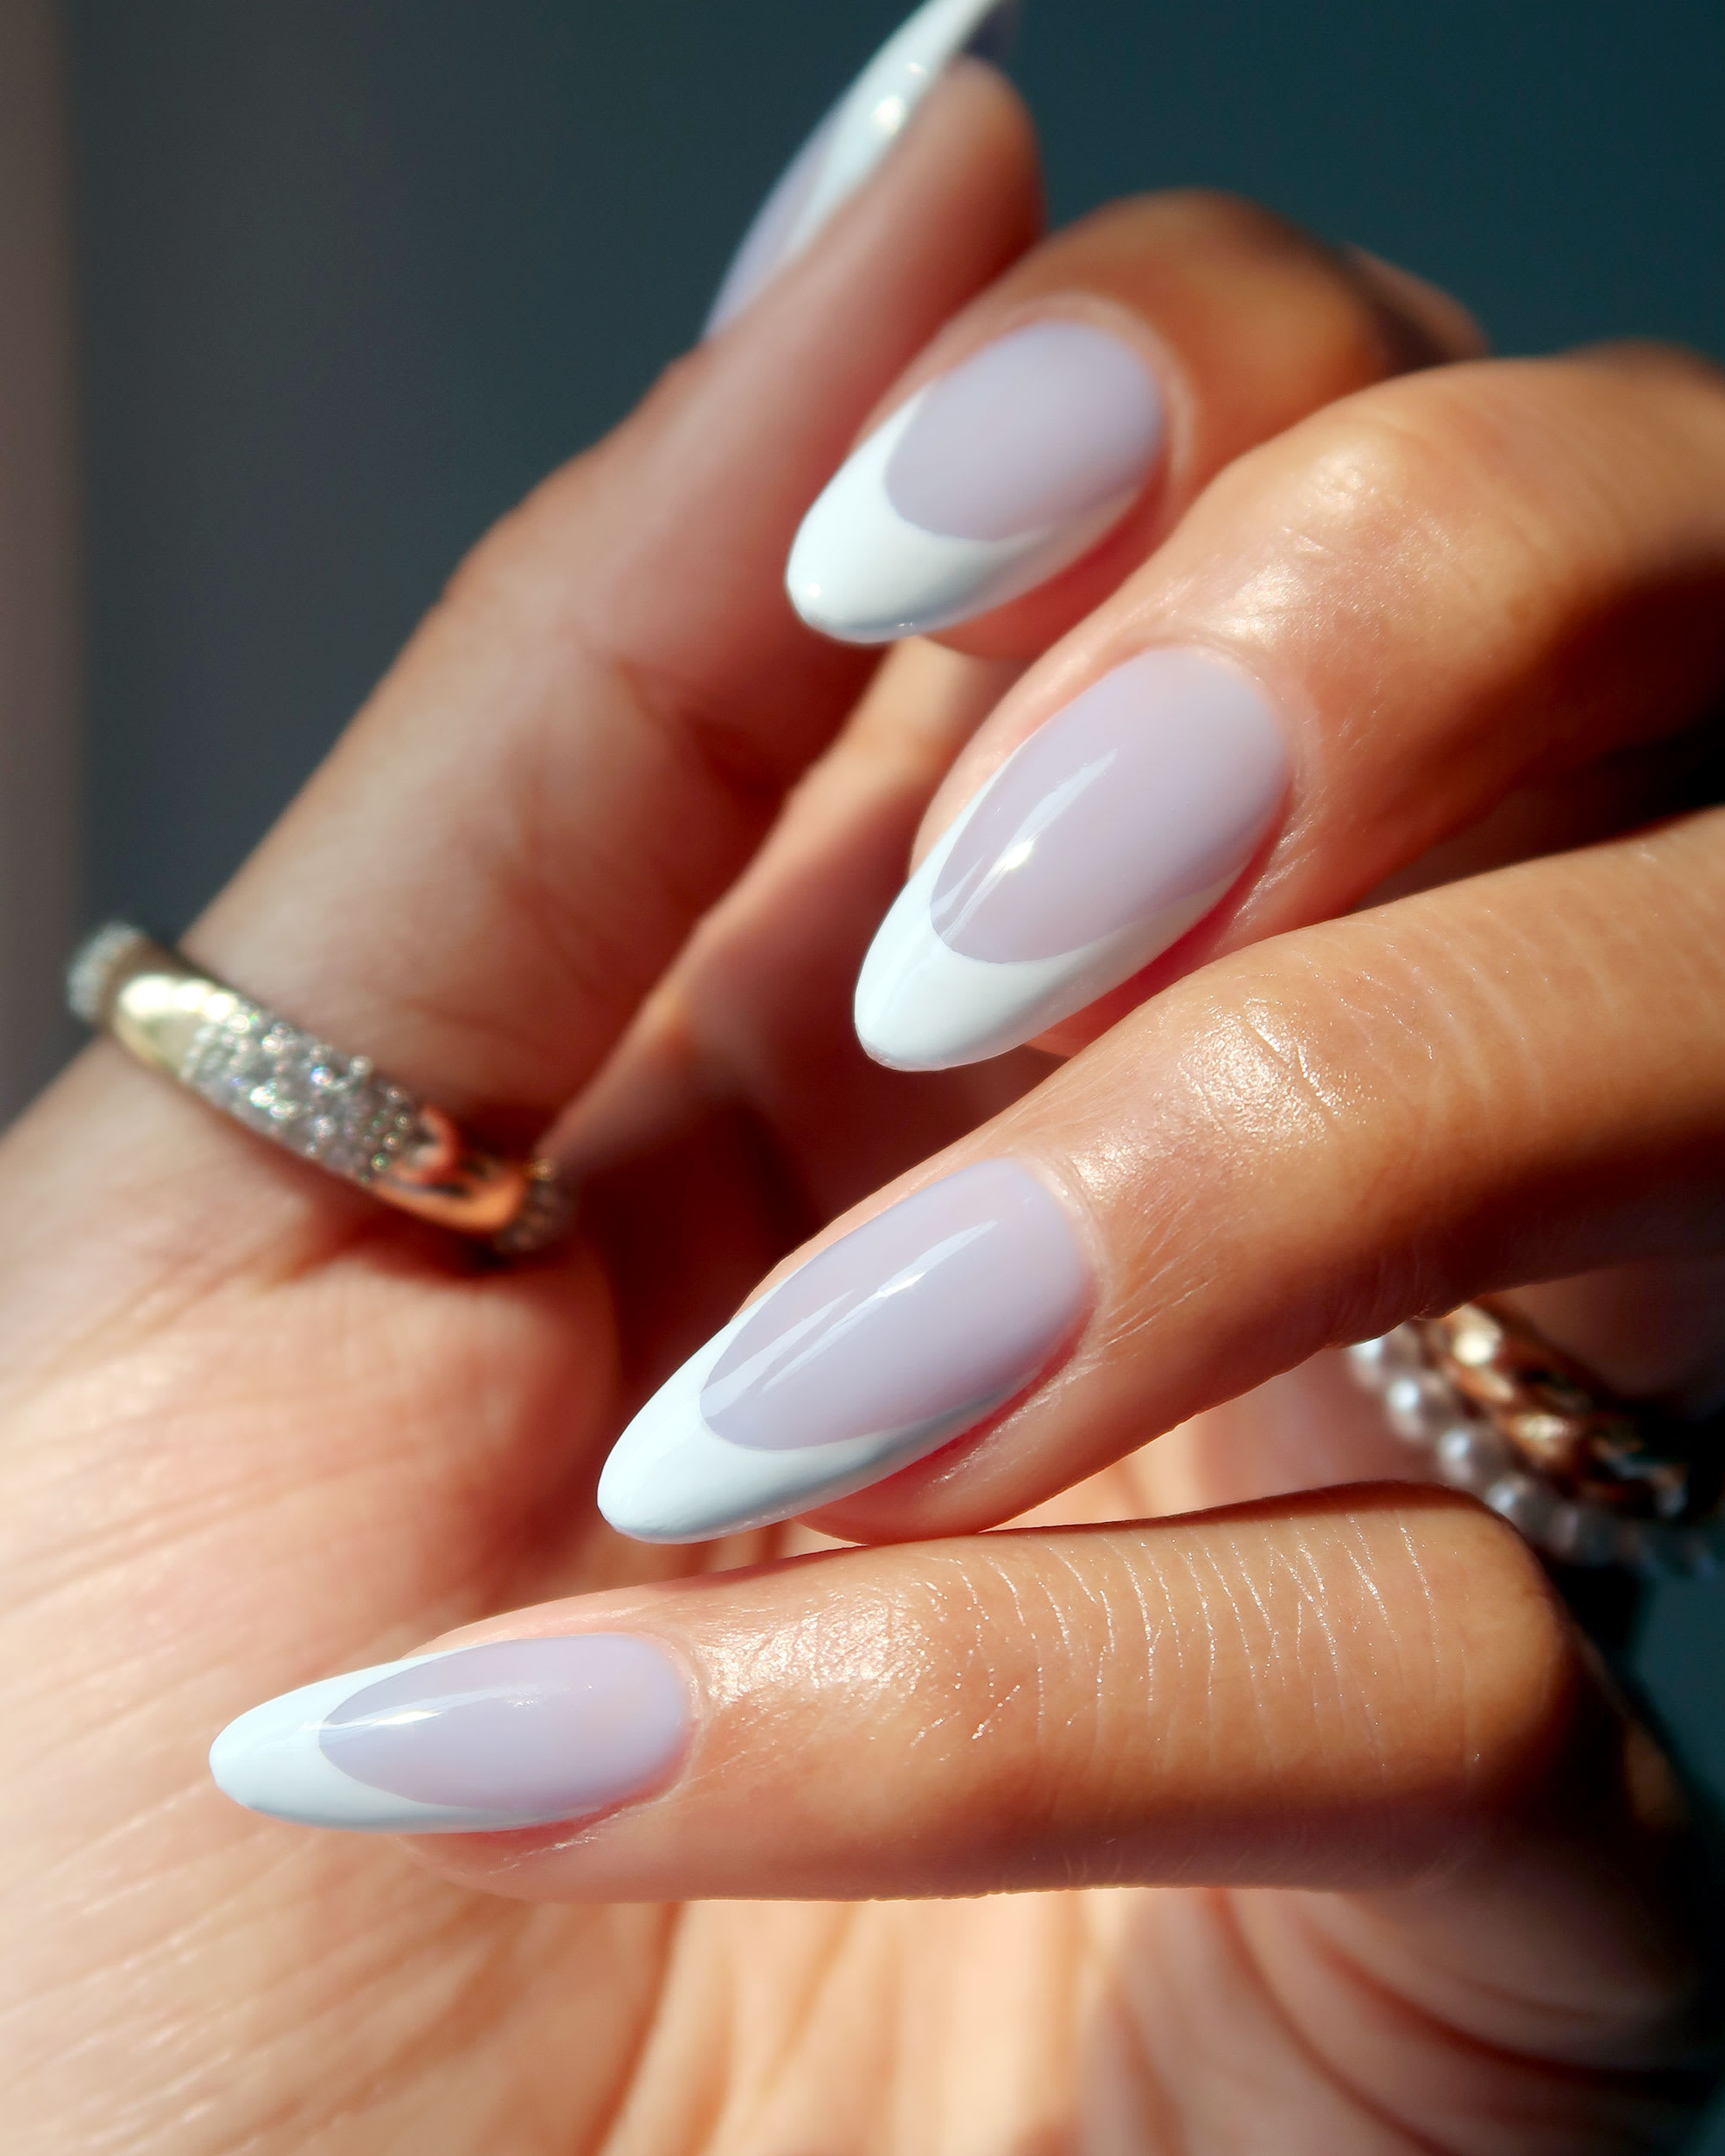 30+ Prom Nails That Will Turn Heads on the Dance Floor